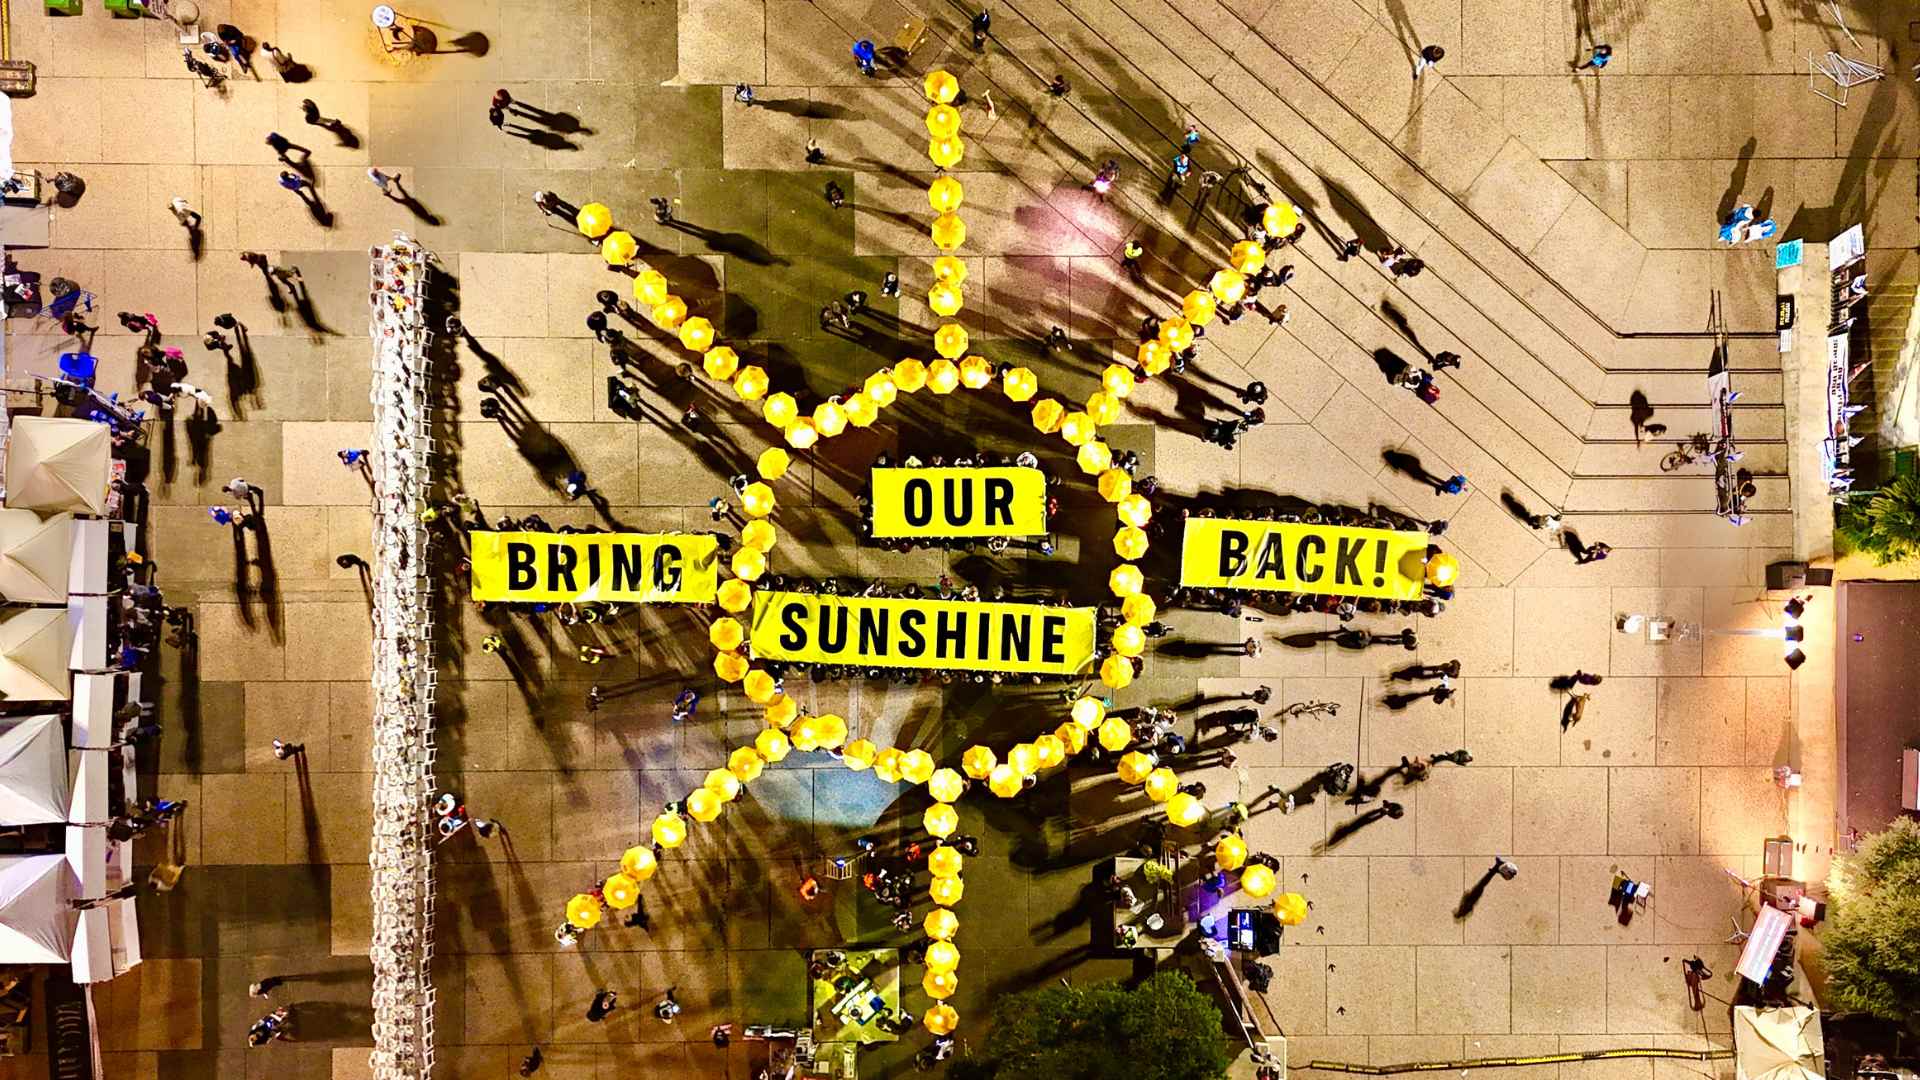 Israel's climate movement exhibit saying "Bring our sunshine back"